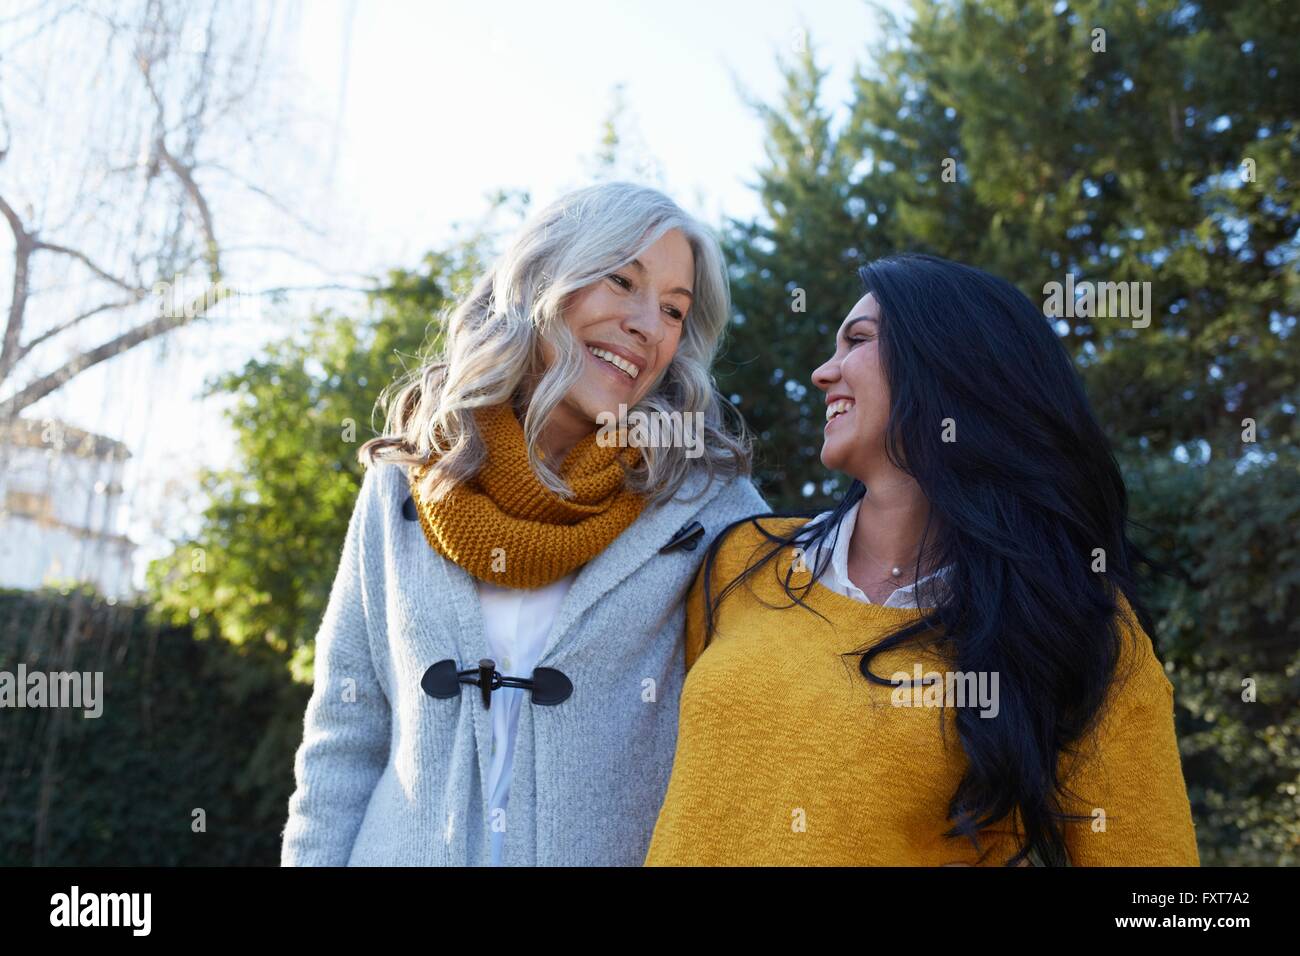 Women in garden arms around each other face to face smiling Stock Photo